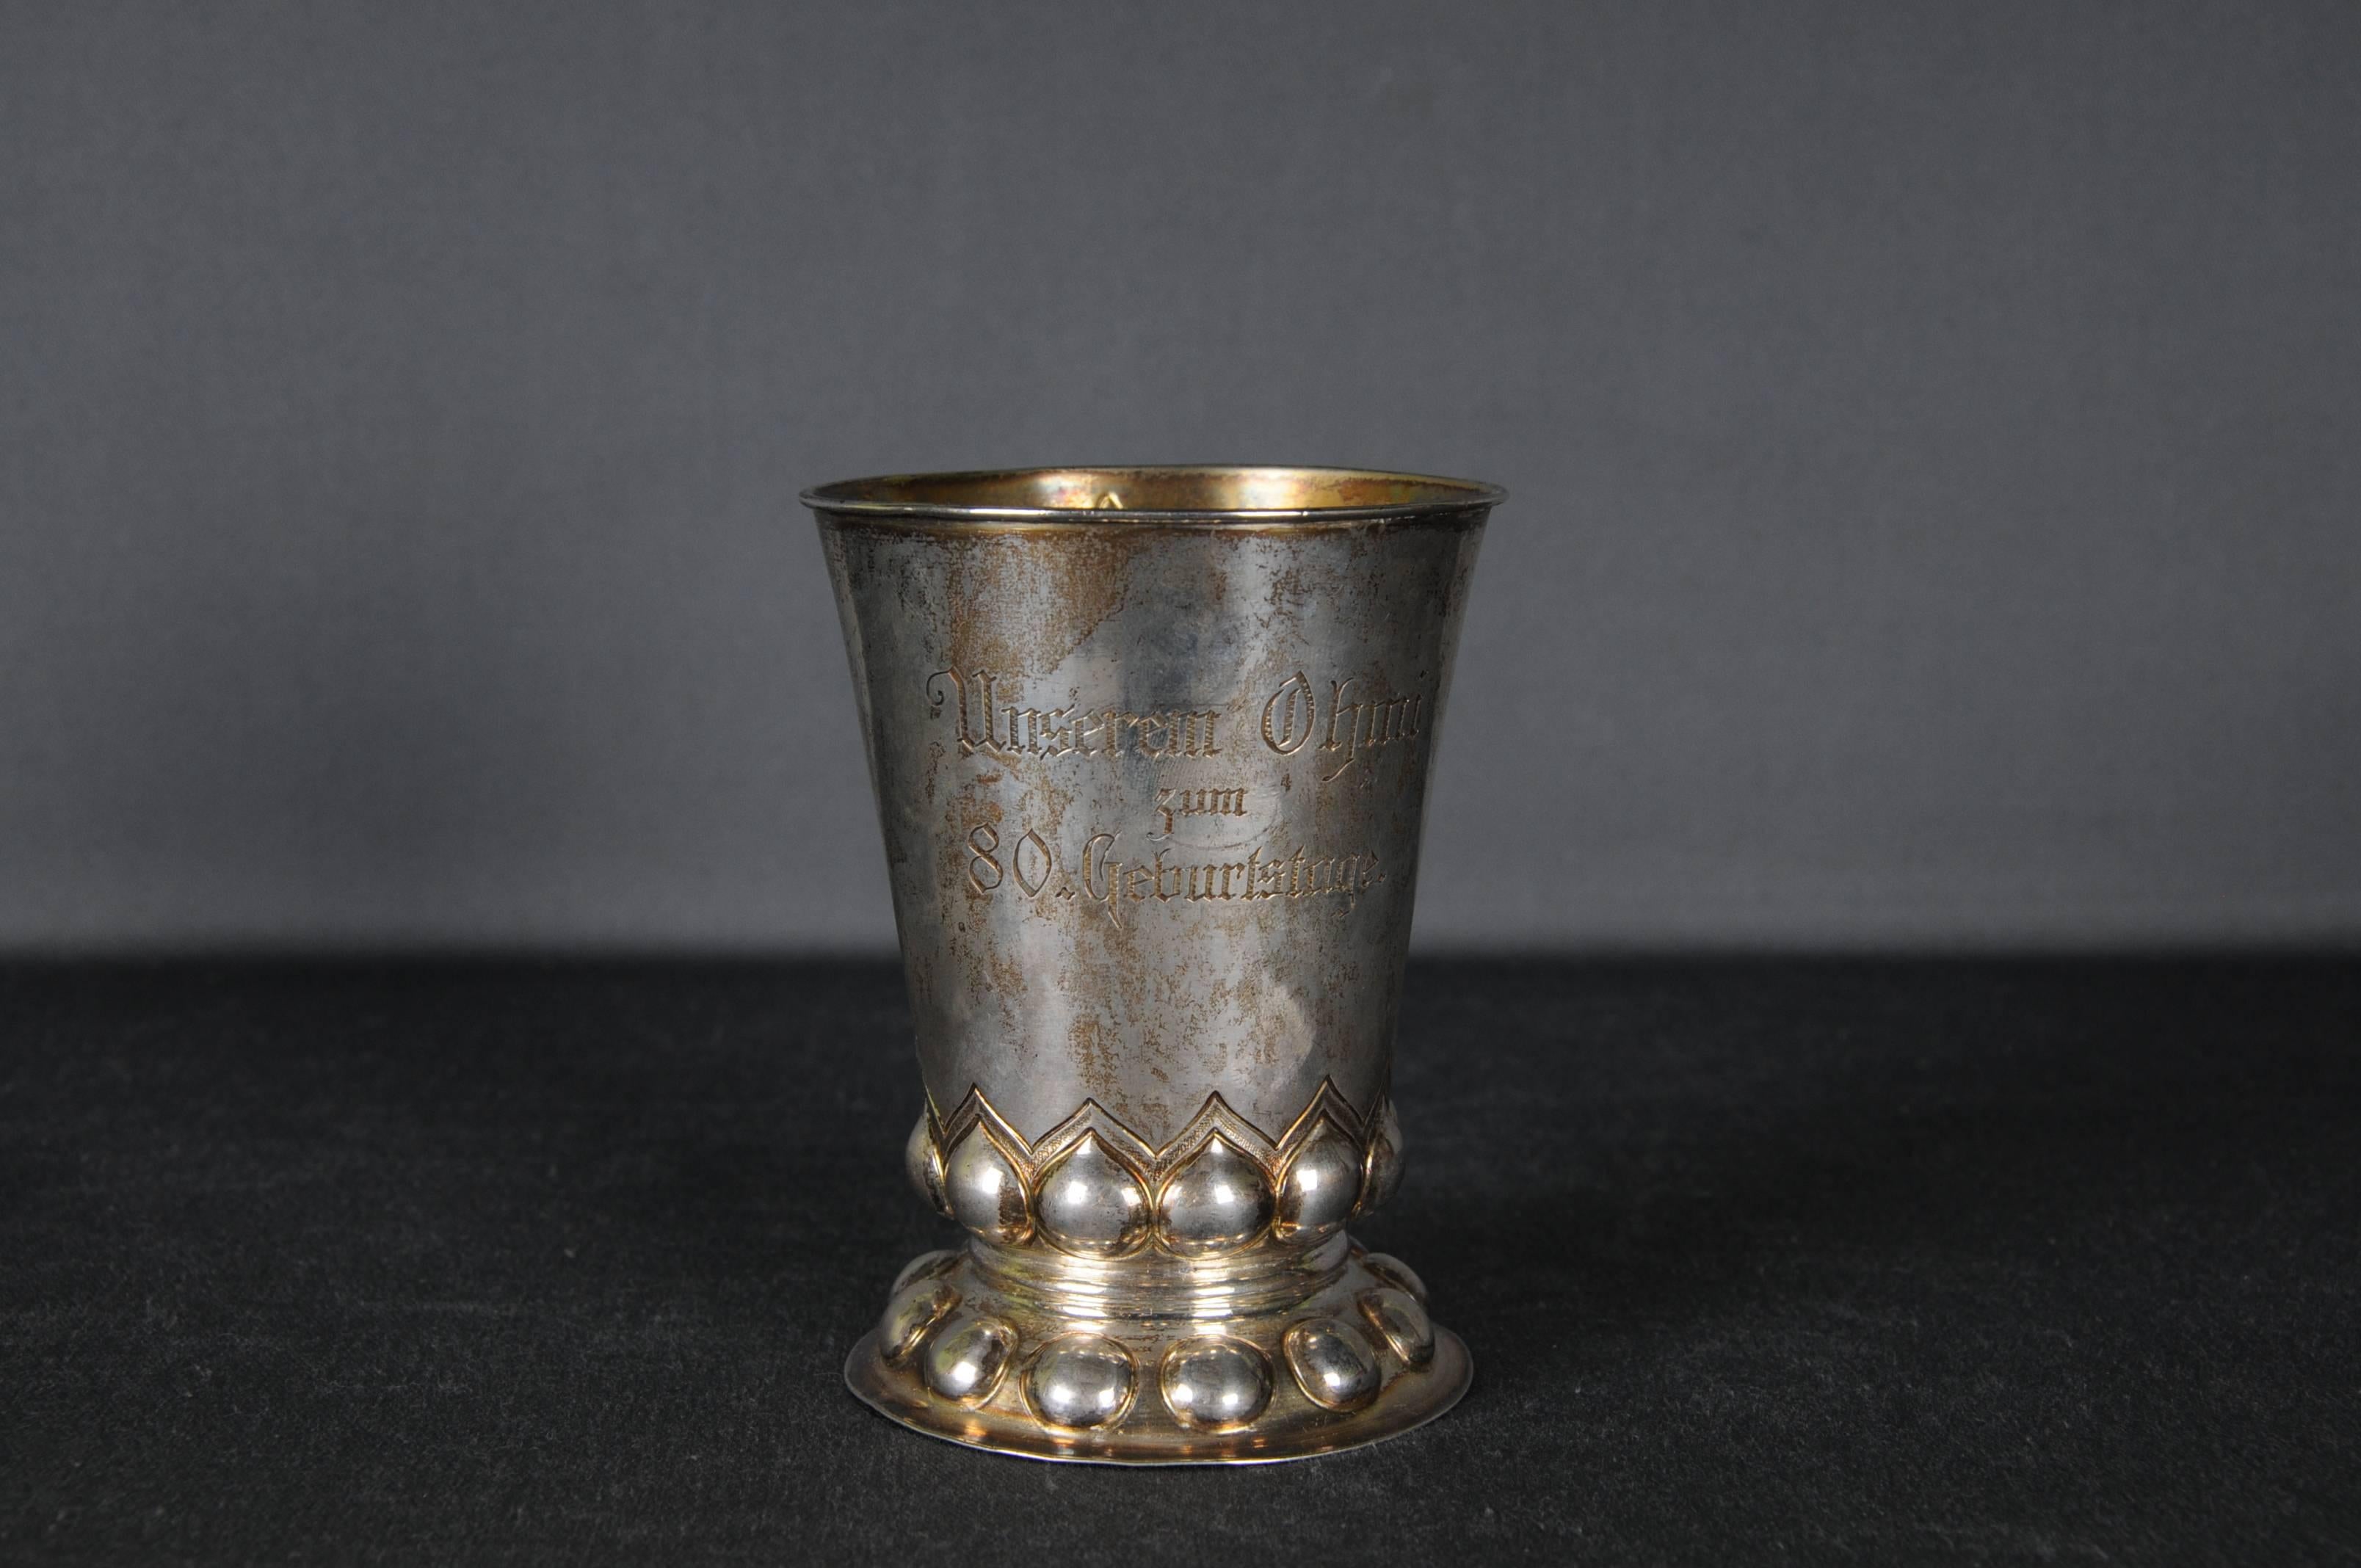 Antique Silver Footcup 800er Silver Germany Cup, gilded, German City View  For Sale 4